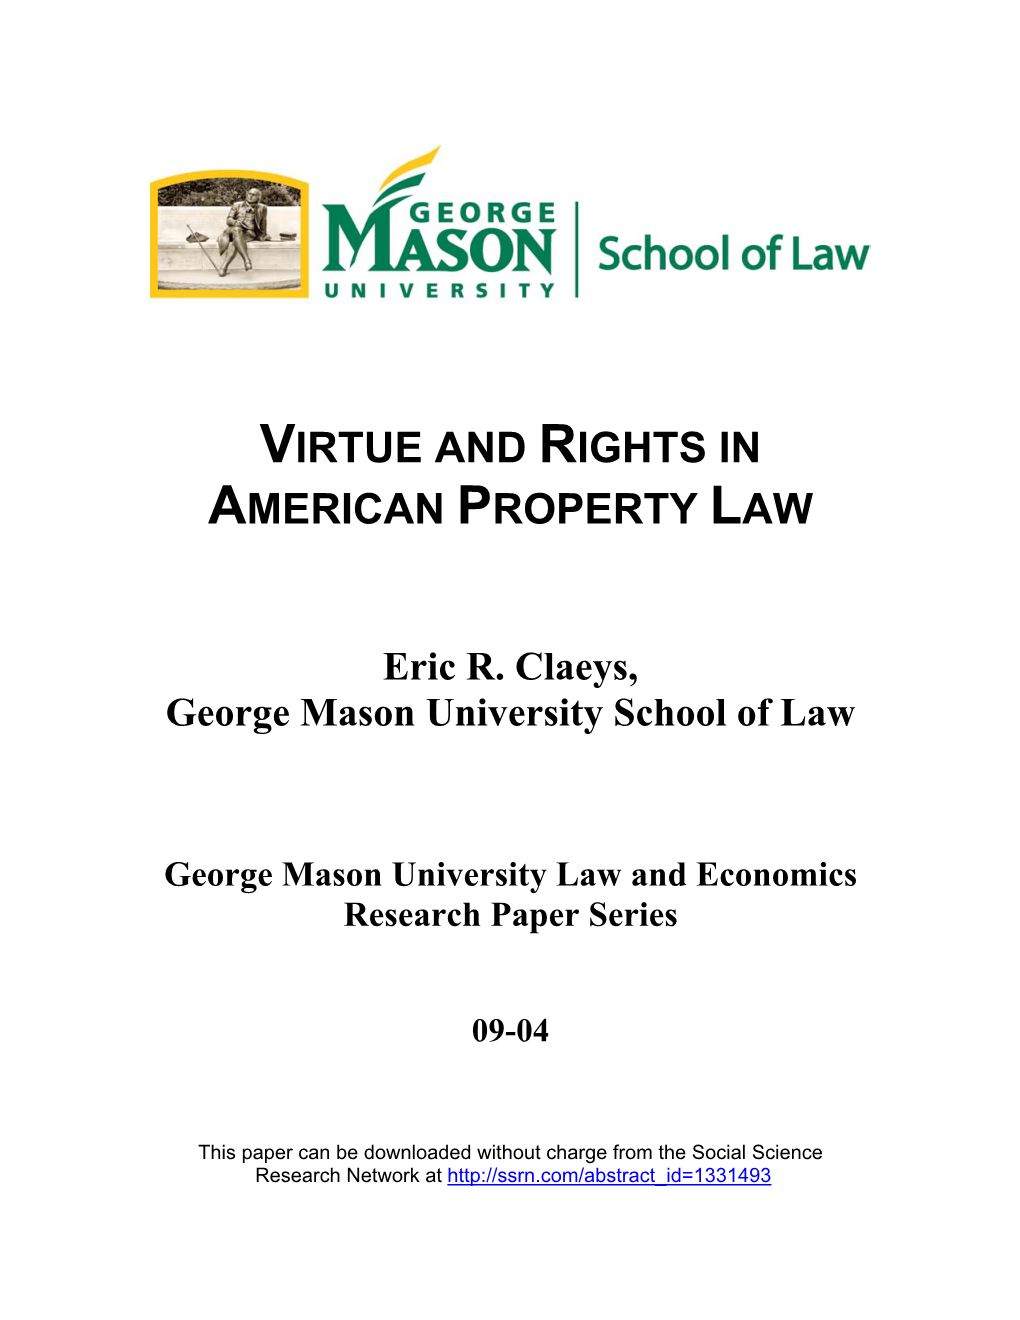 Virtue and Rights in American Property Law